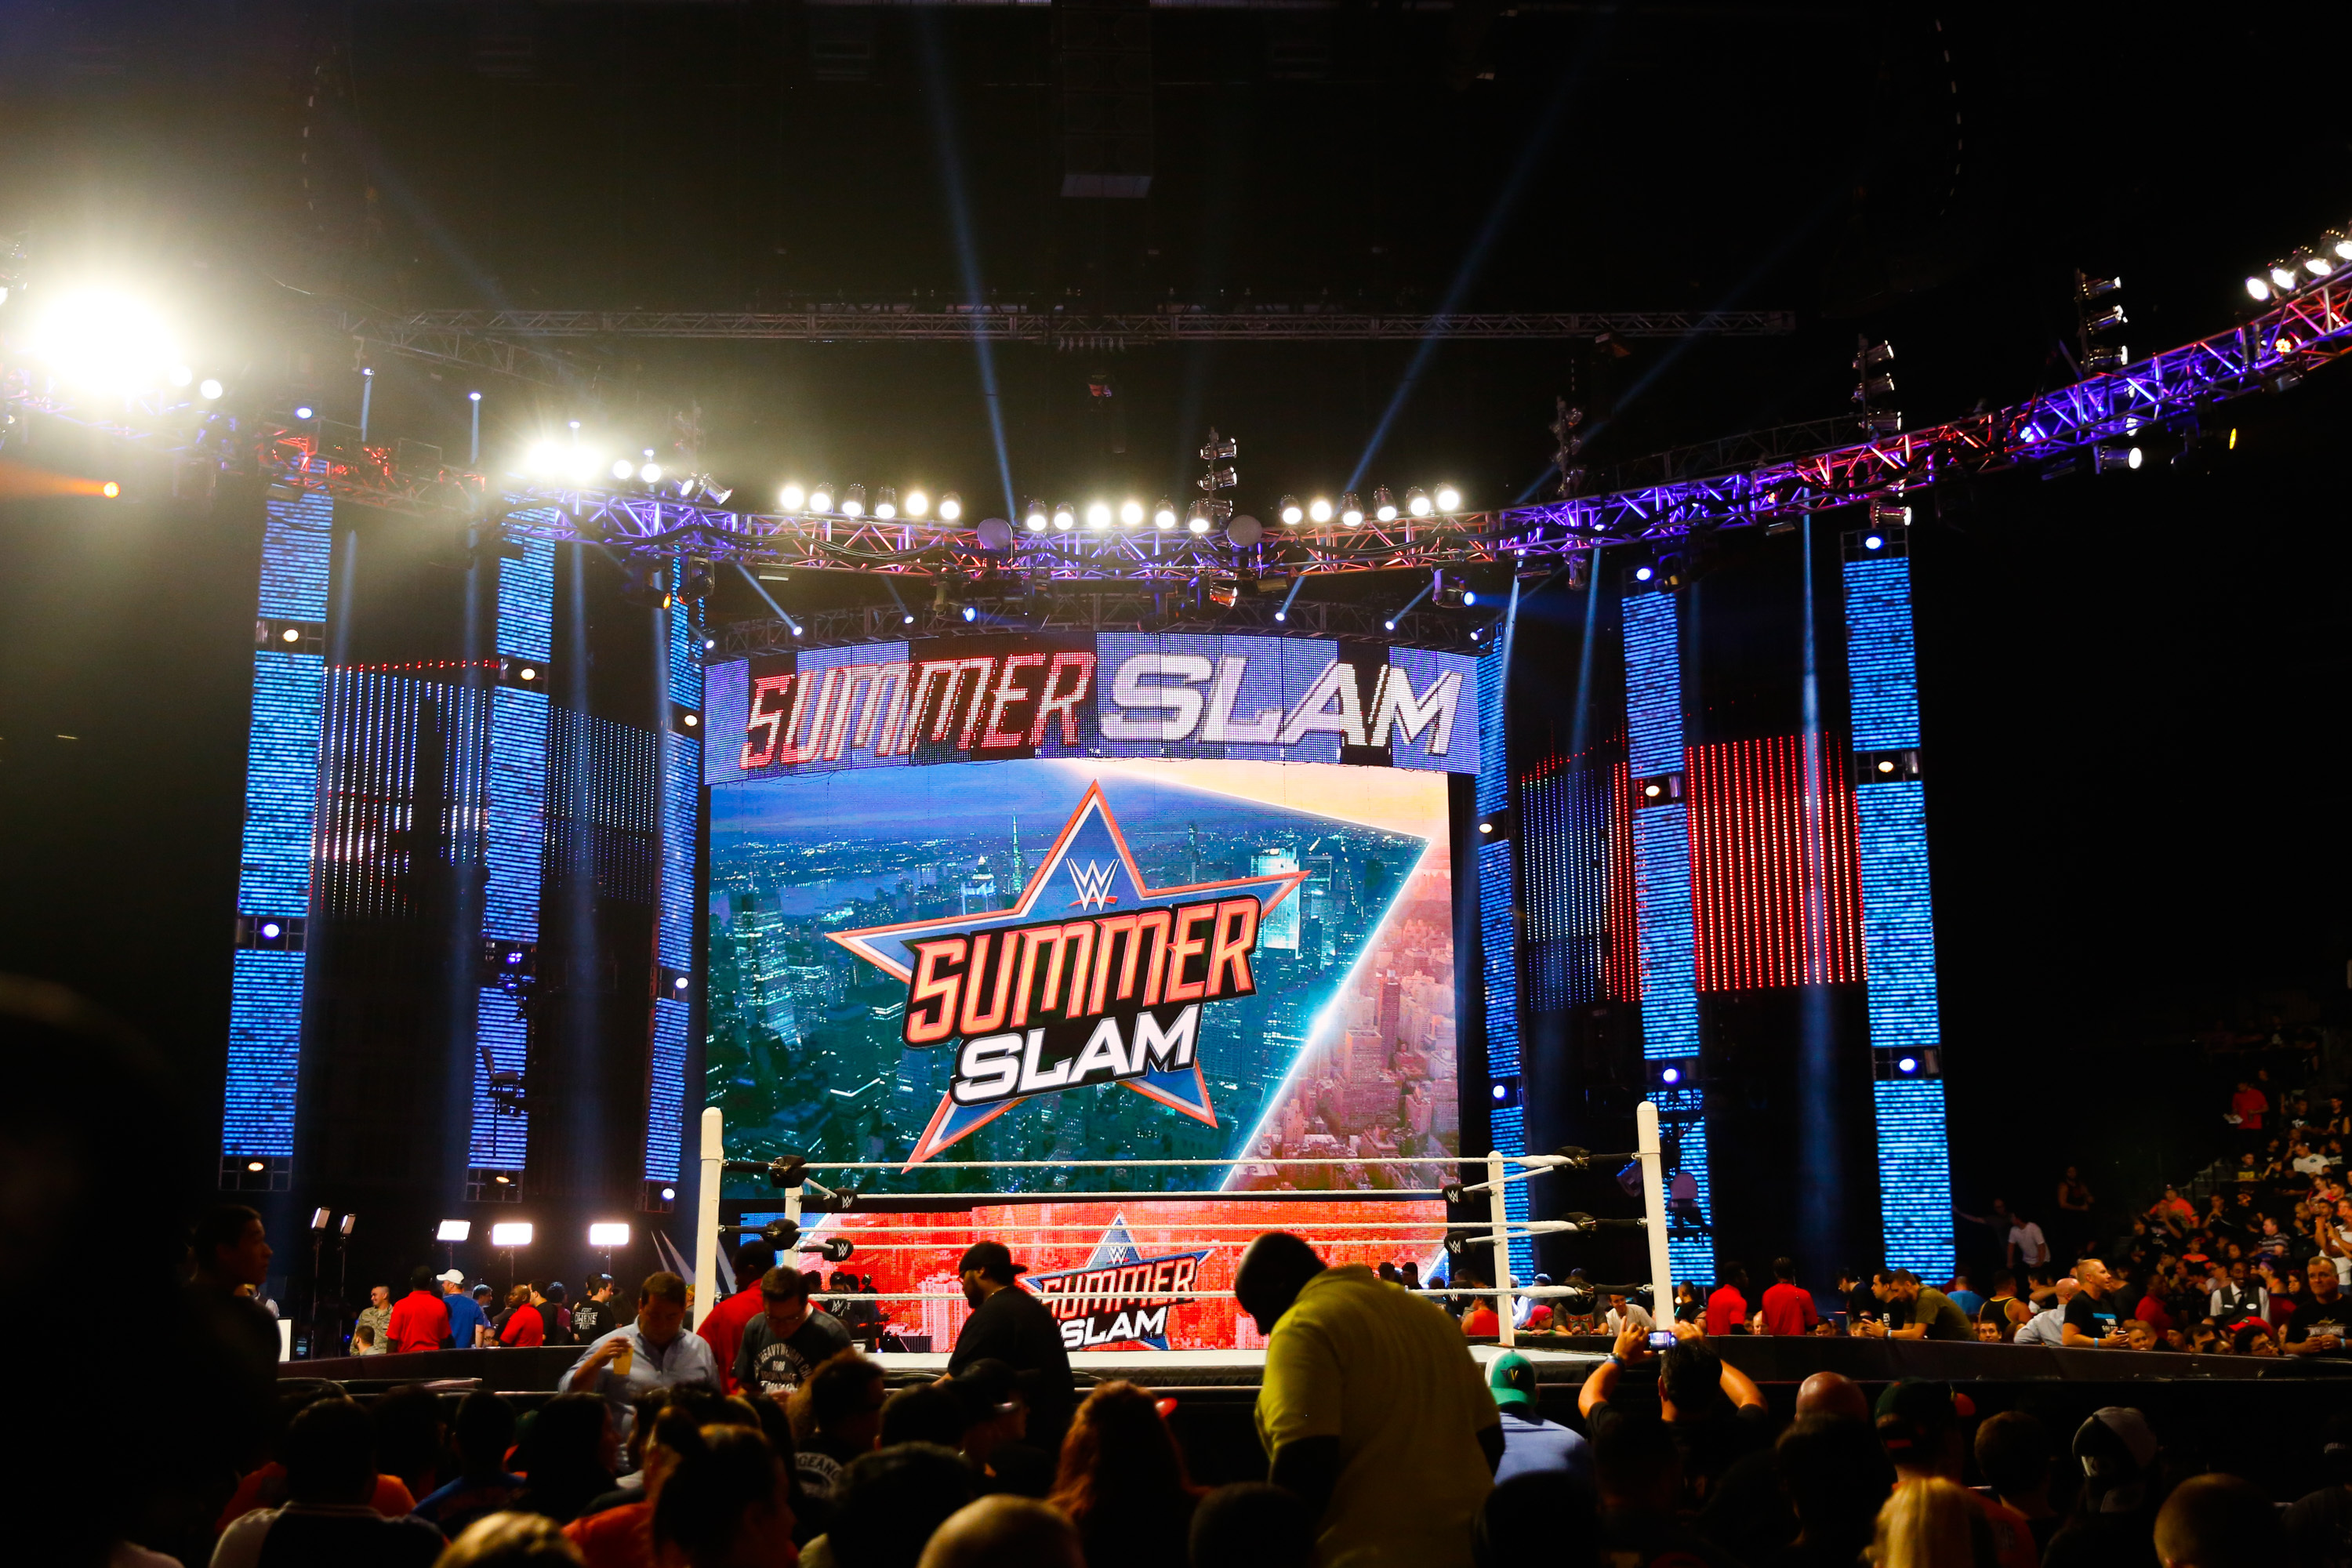 Wwe Summerslam 2020 Week Will Be Hosted By Boston At Td Garden